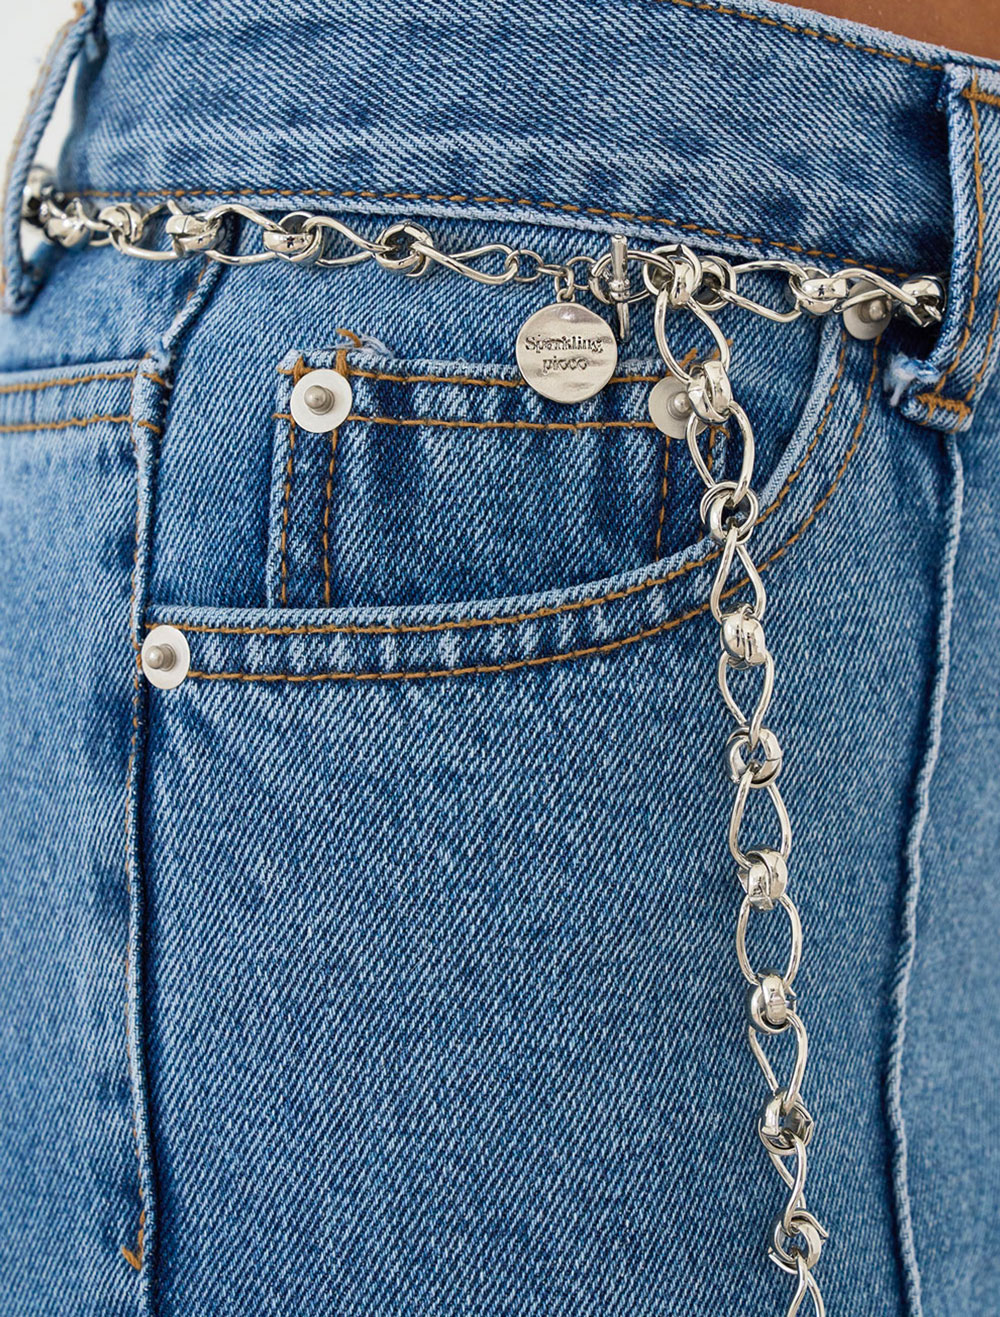 CLARE BELLY CHAIN BELT DOUBLE RING